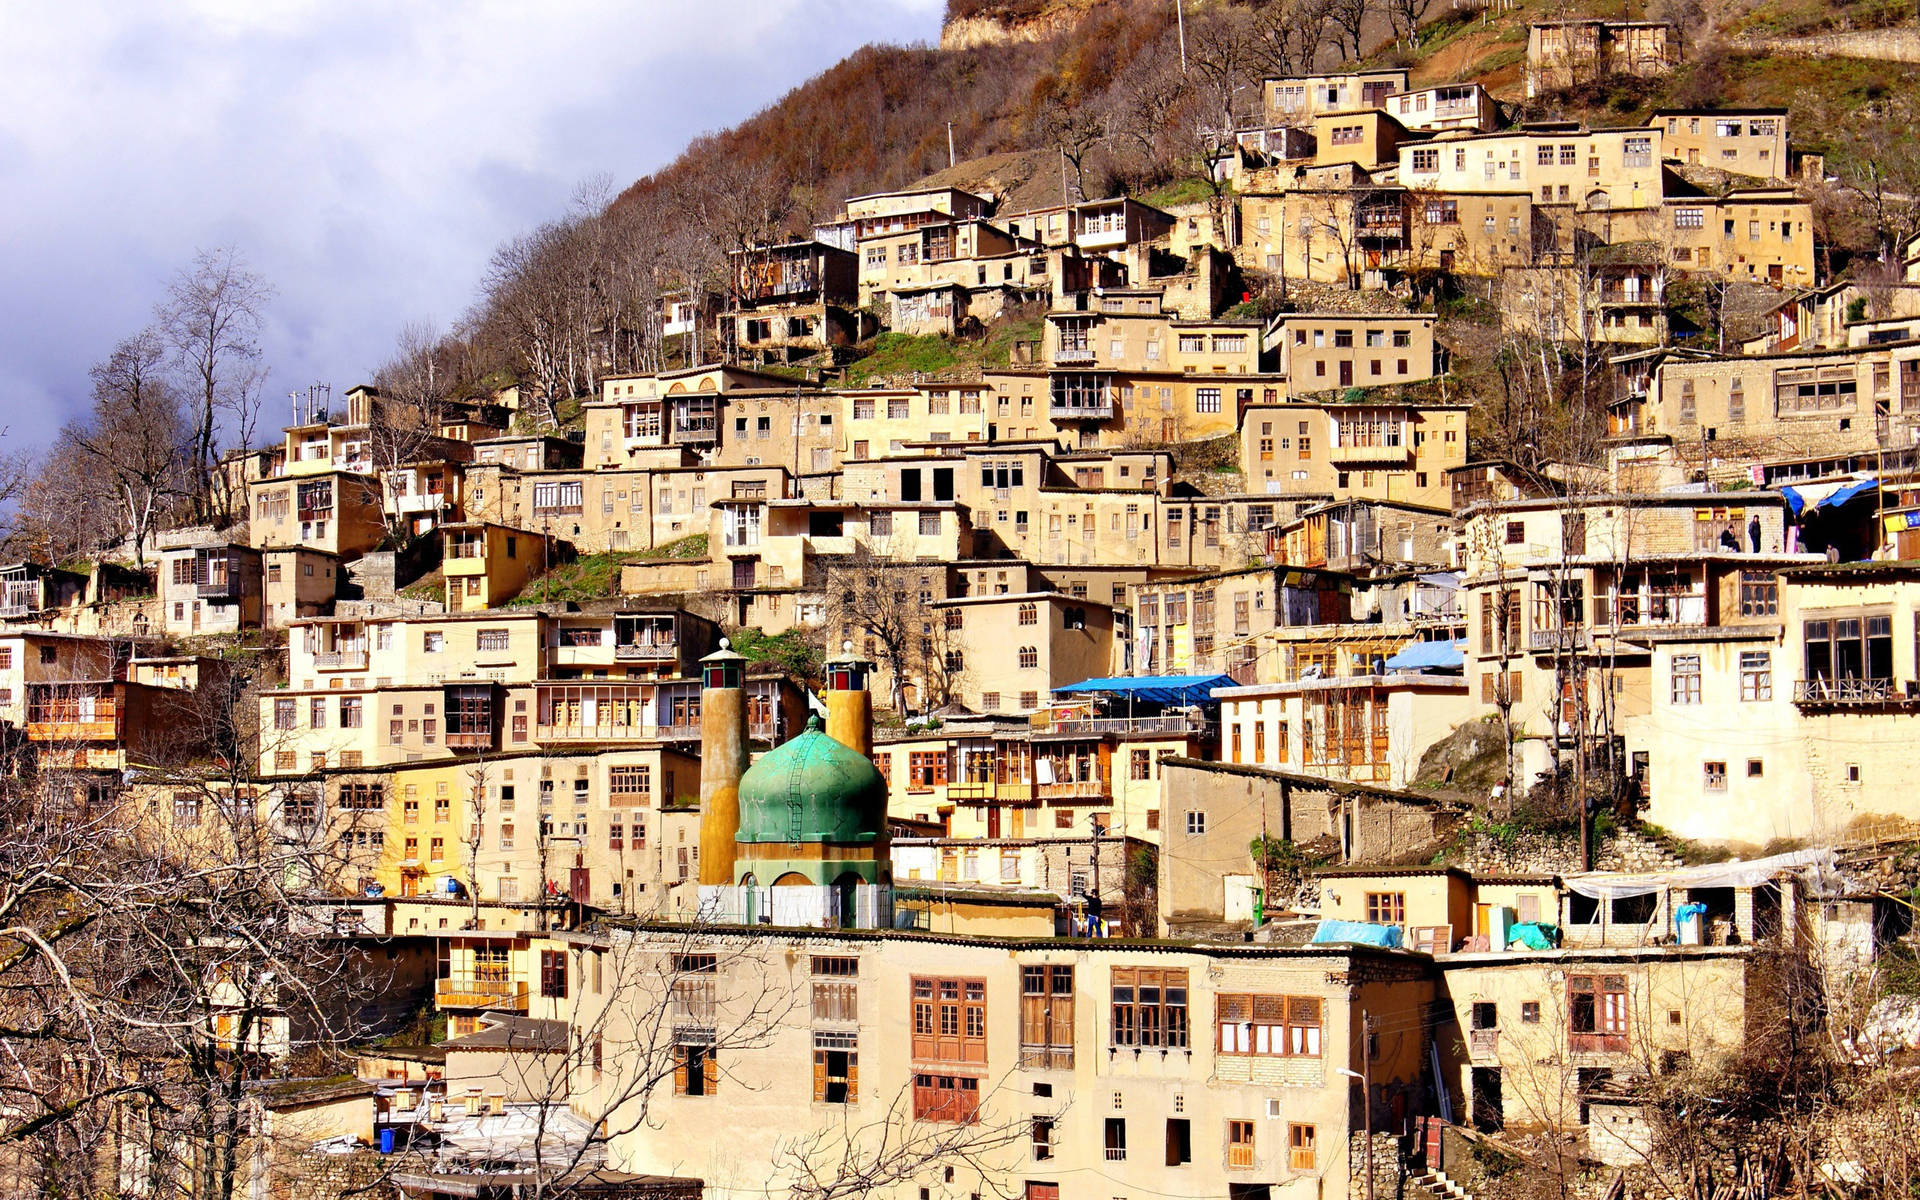 Caption: Breathtaking view of residential houses on the mountain slope in Tehran Wallpaper